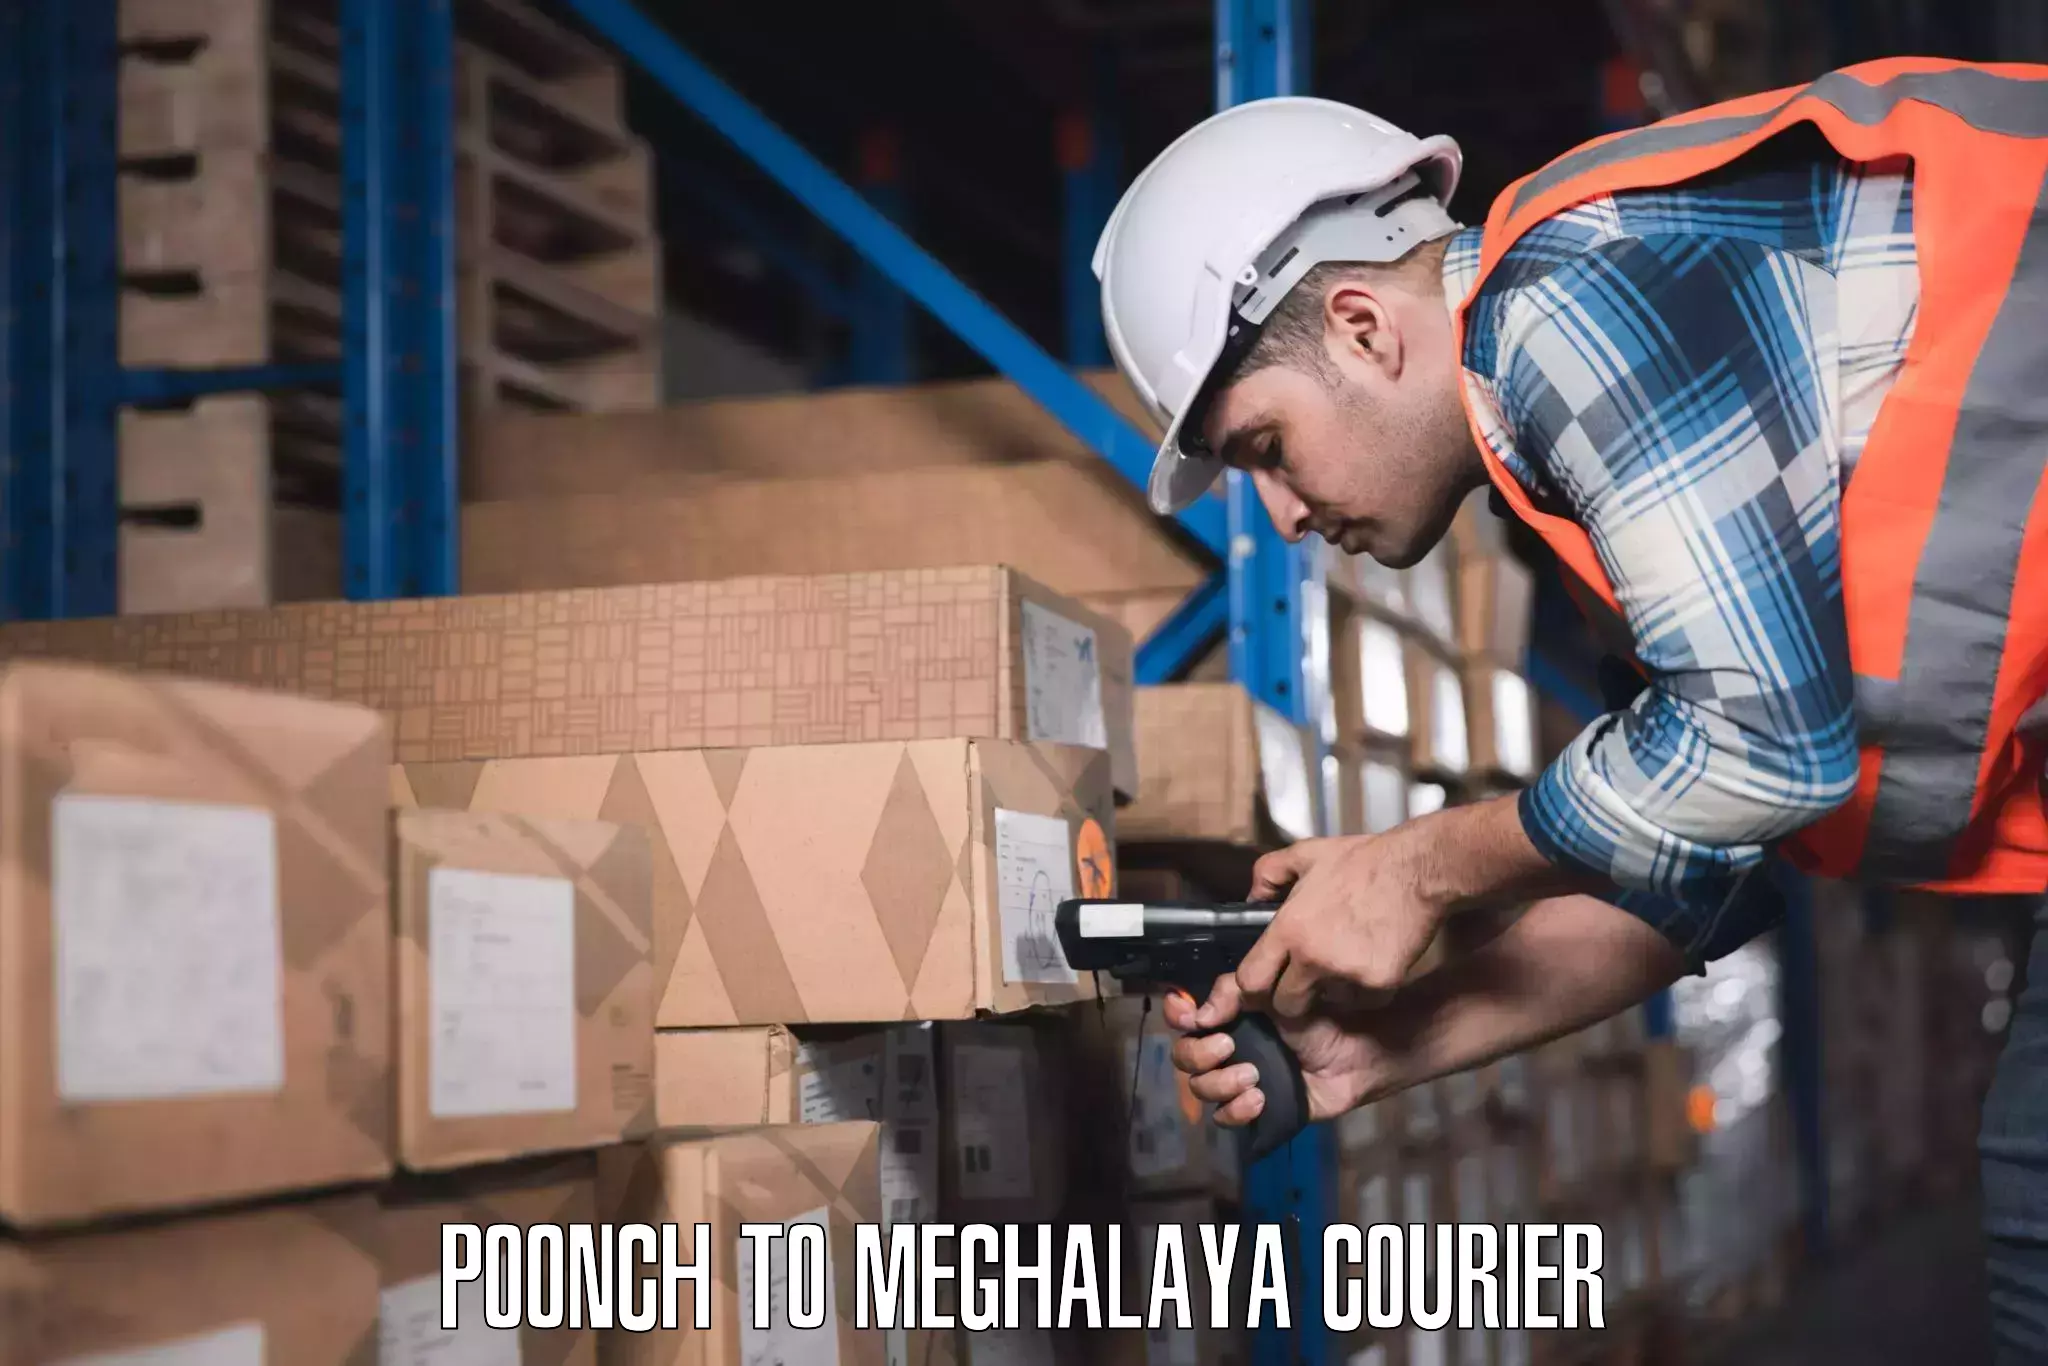 Luggage shipping specialists Poonch to Meghalaya